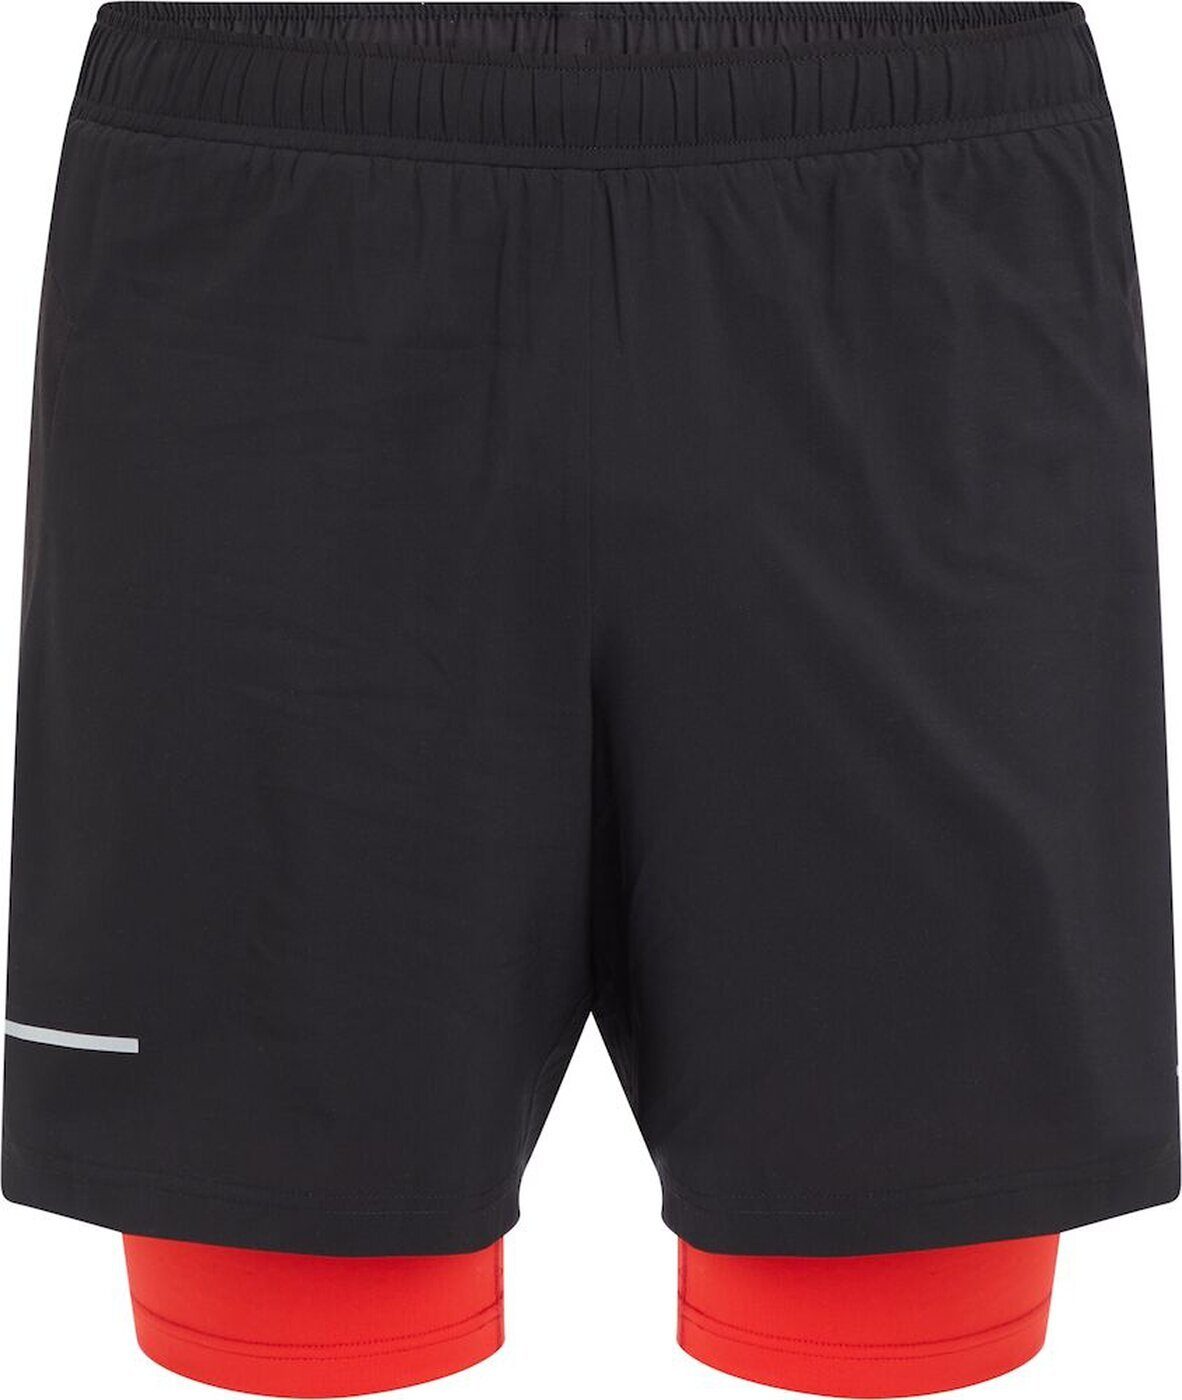 Allen ux 2-in-1-Shorts Energetics IV BLACK/RED He.-Shorts